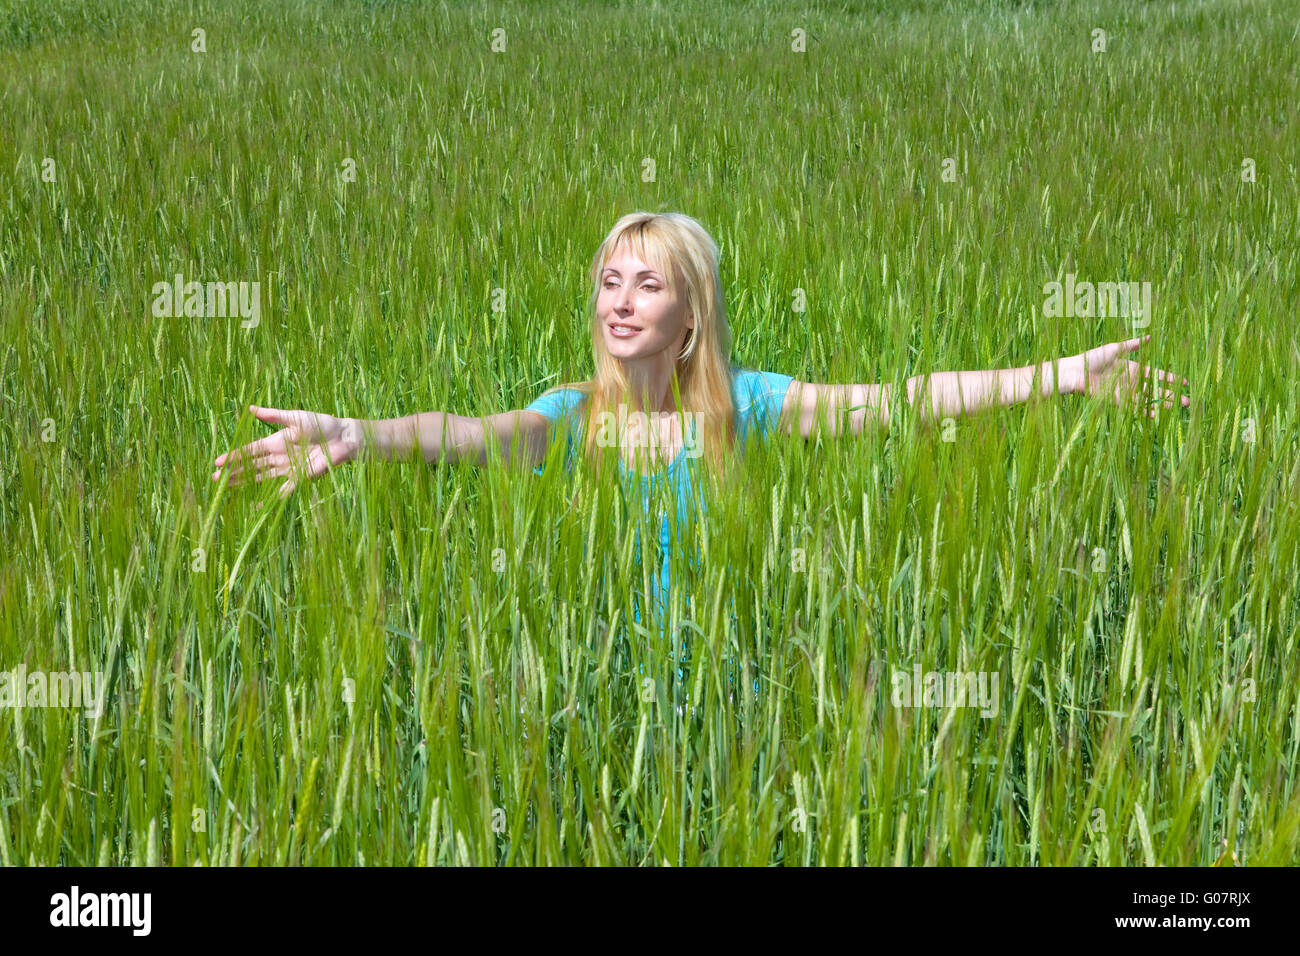 The happy young woman in the field of green ears Stock Photo